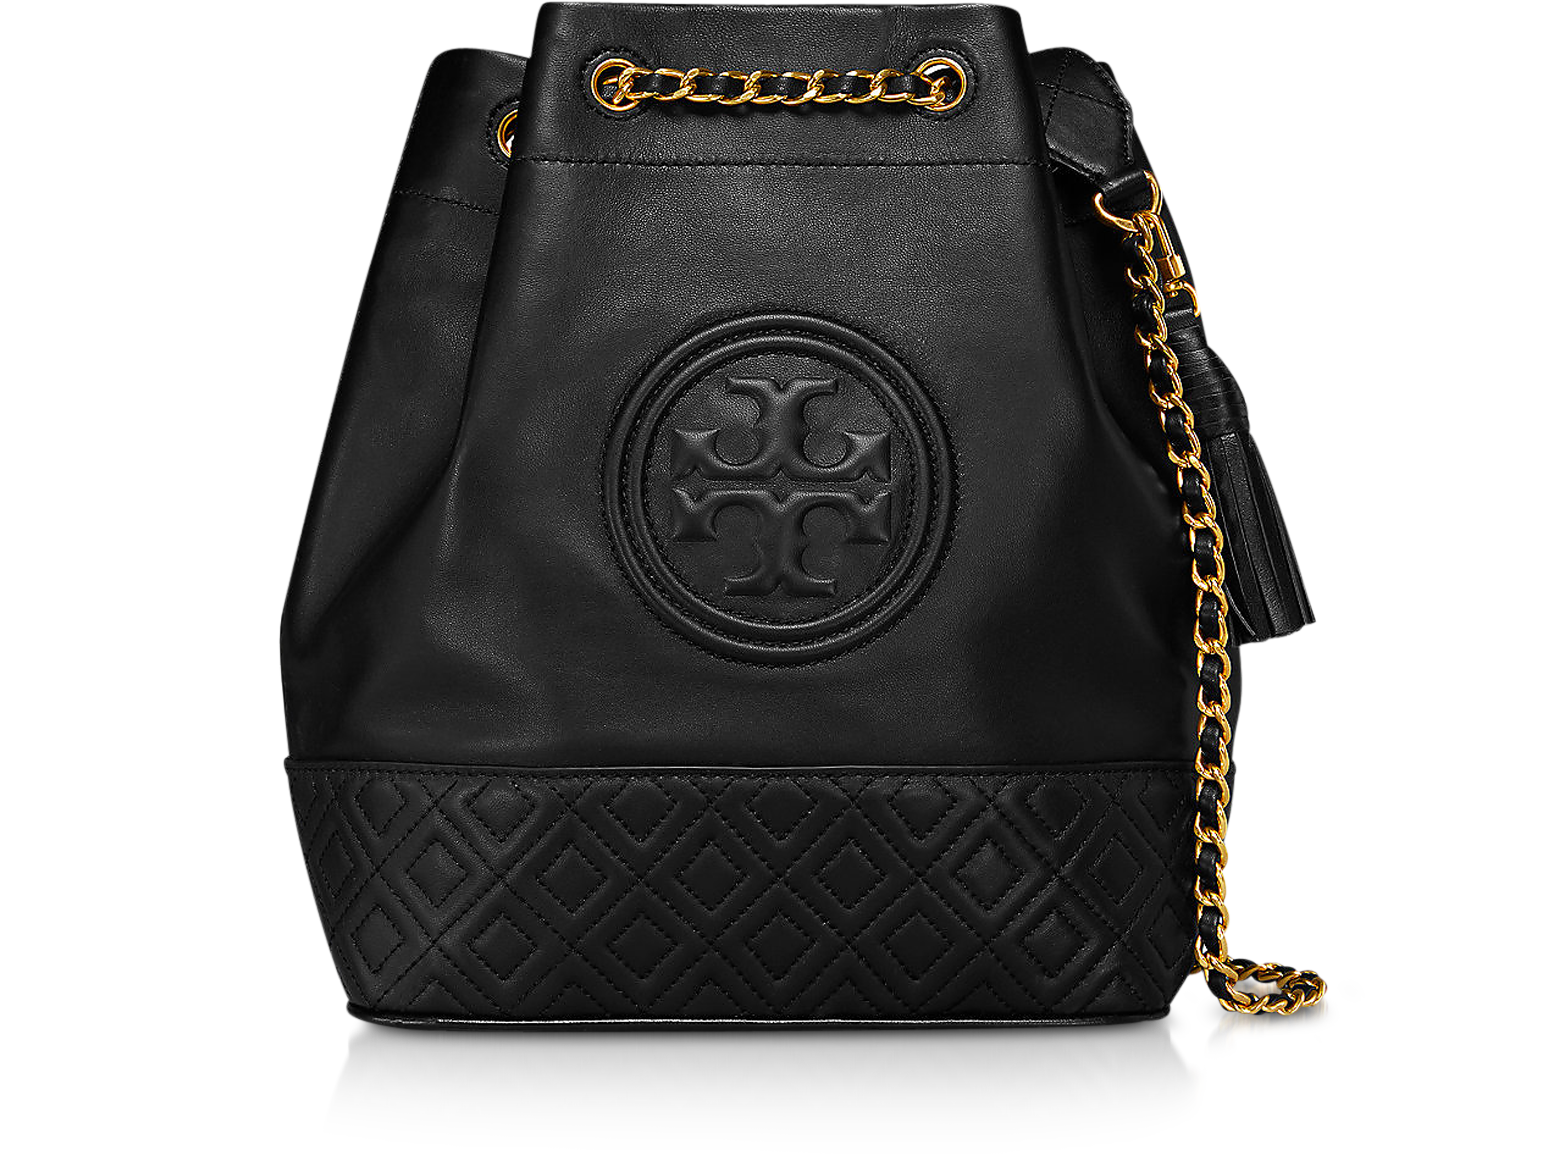 Tory Burch Black Leather Fleming Bucket Bag at FORZIERI